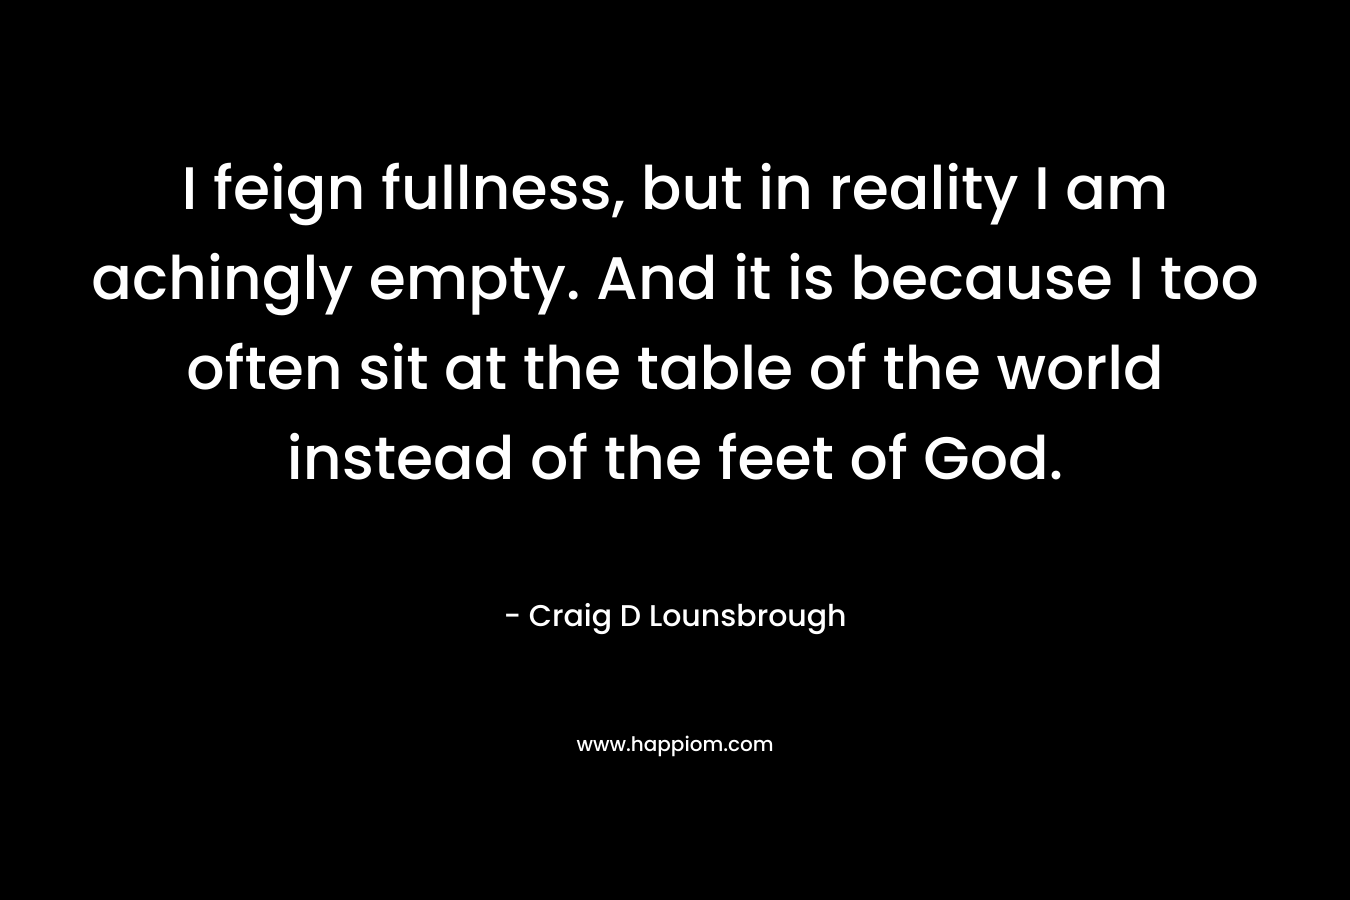 I feign fullness, but in reality I am achingly empty. And it is because I too often sit at the table of the world instead of the feet of God.